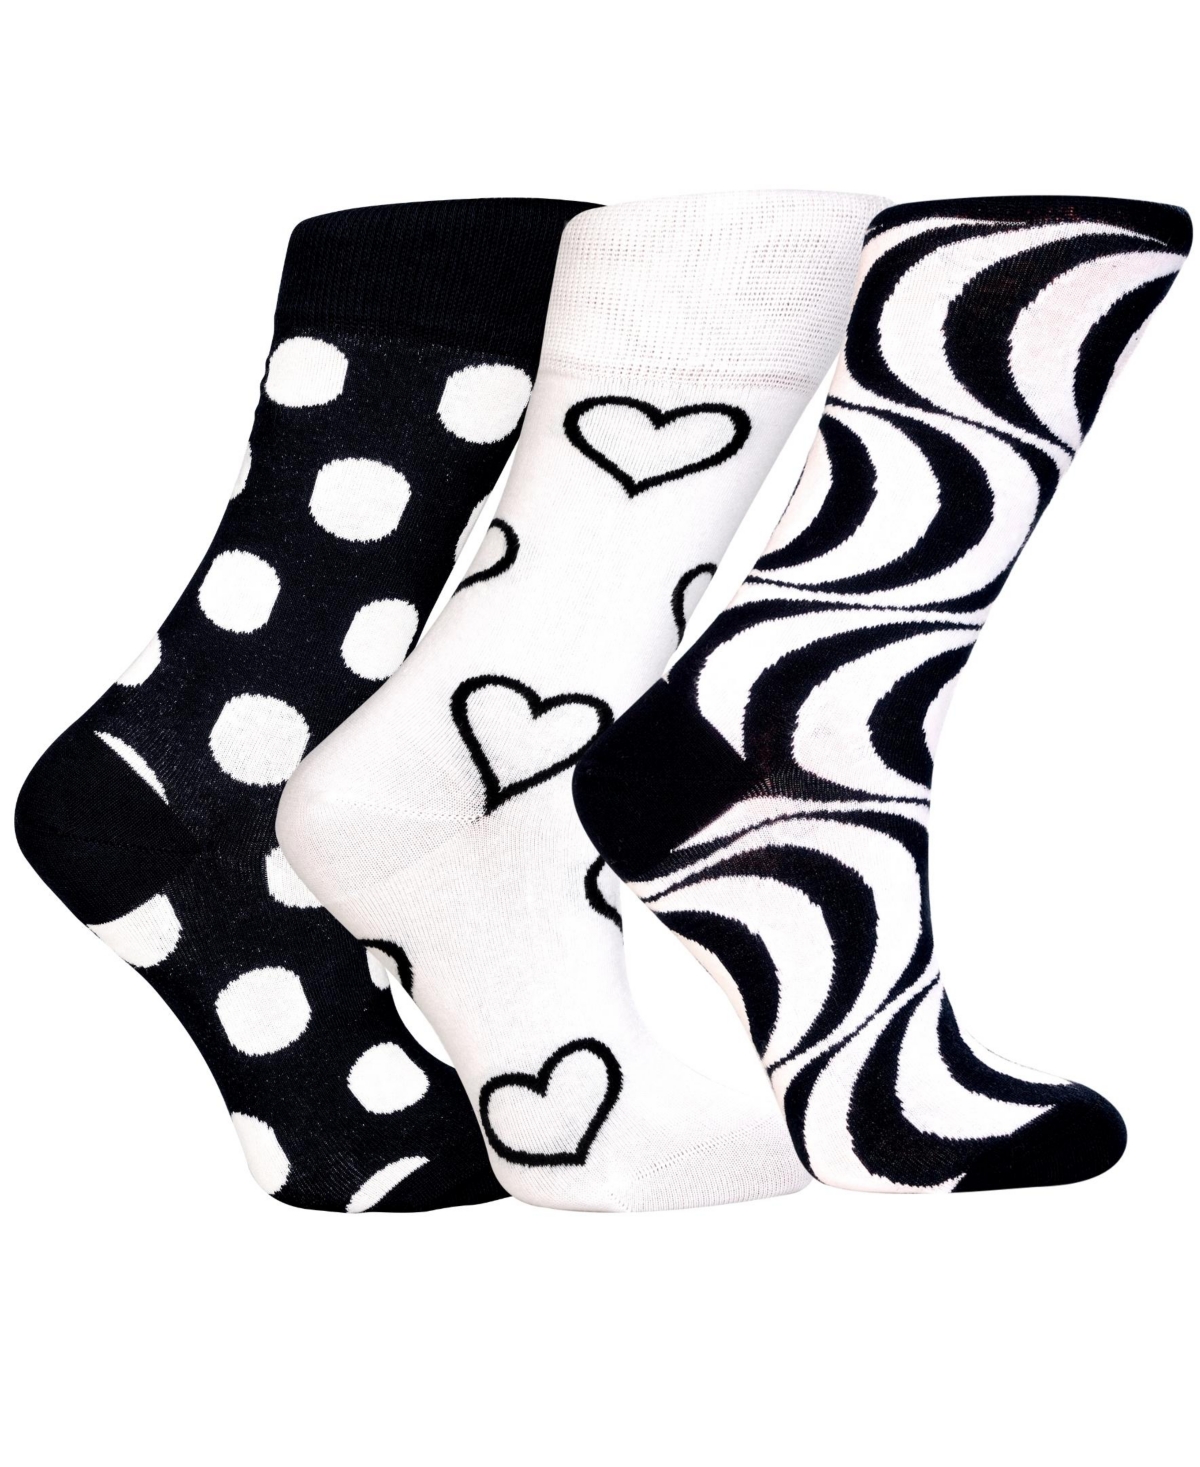 Love Sock Company Women's Denver Gift Box of Cotton Seamless Toe Premium Colorful Fun Patterned Crew Socks, Pack of 3